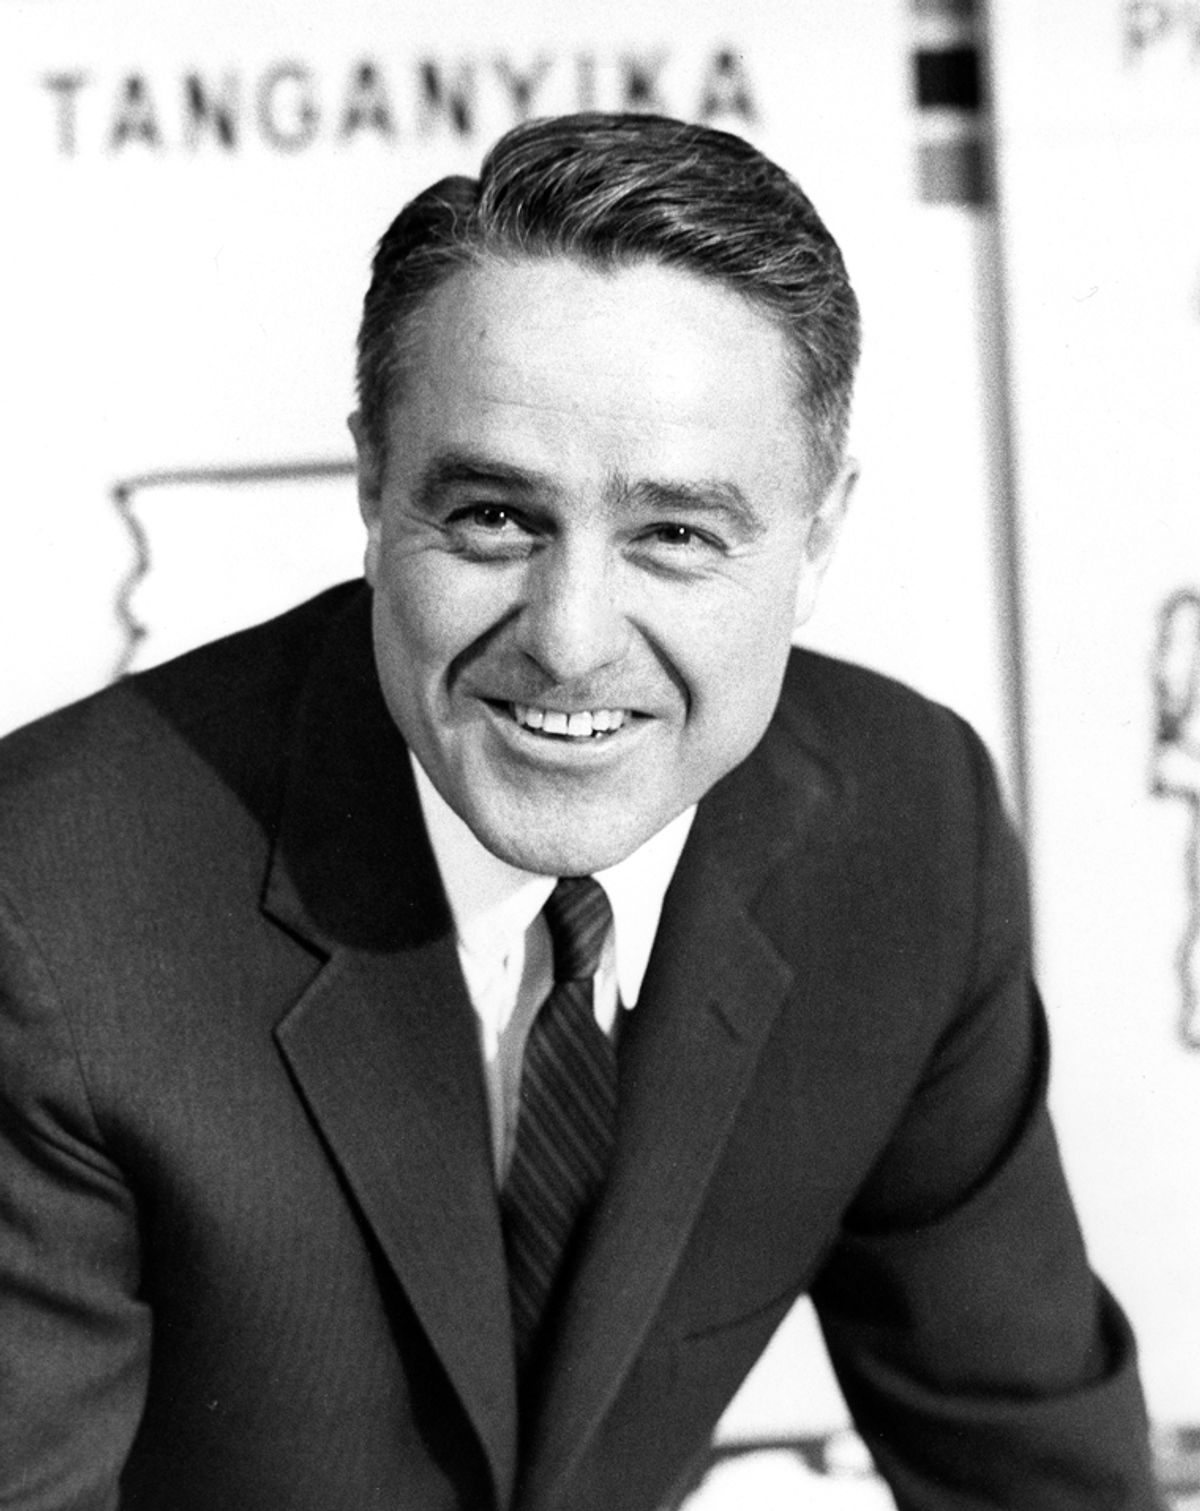 Portrait of R. Sargent Shriver (ca. 1962), first Director of the Peace Corps. Photograph in the R. Sargent Shriver Collection, John F. Kennedy Presidential Library and Museum, Boston.